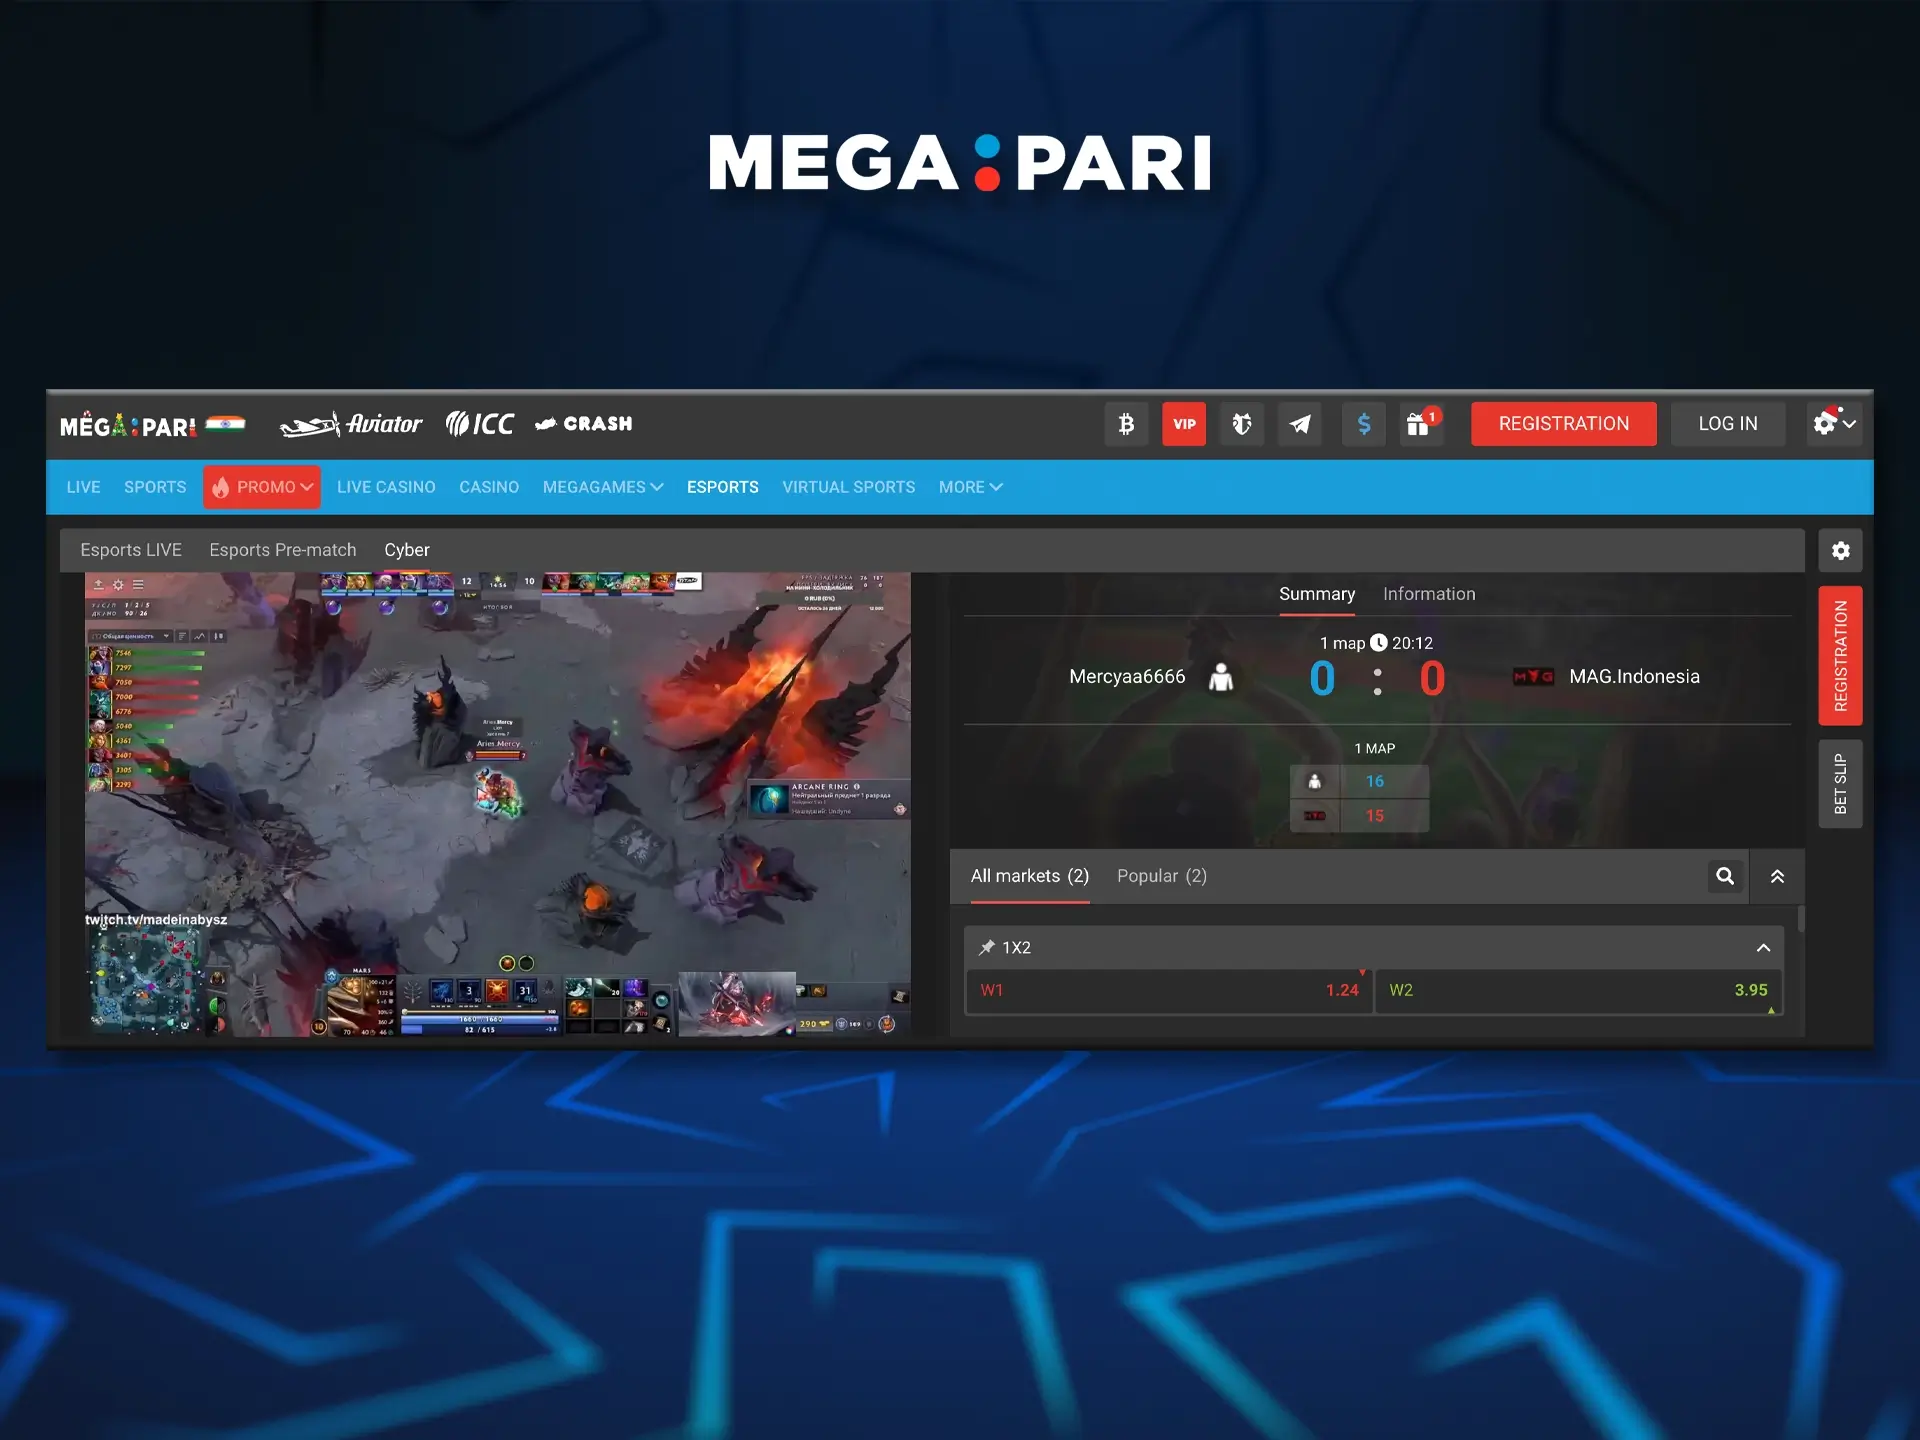 The Megapari site is characterised by its user-friendliness and responsiveness, which allows you to bet on cyber sports quickly.